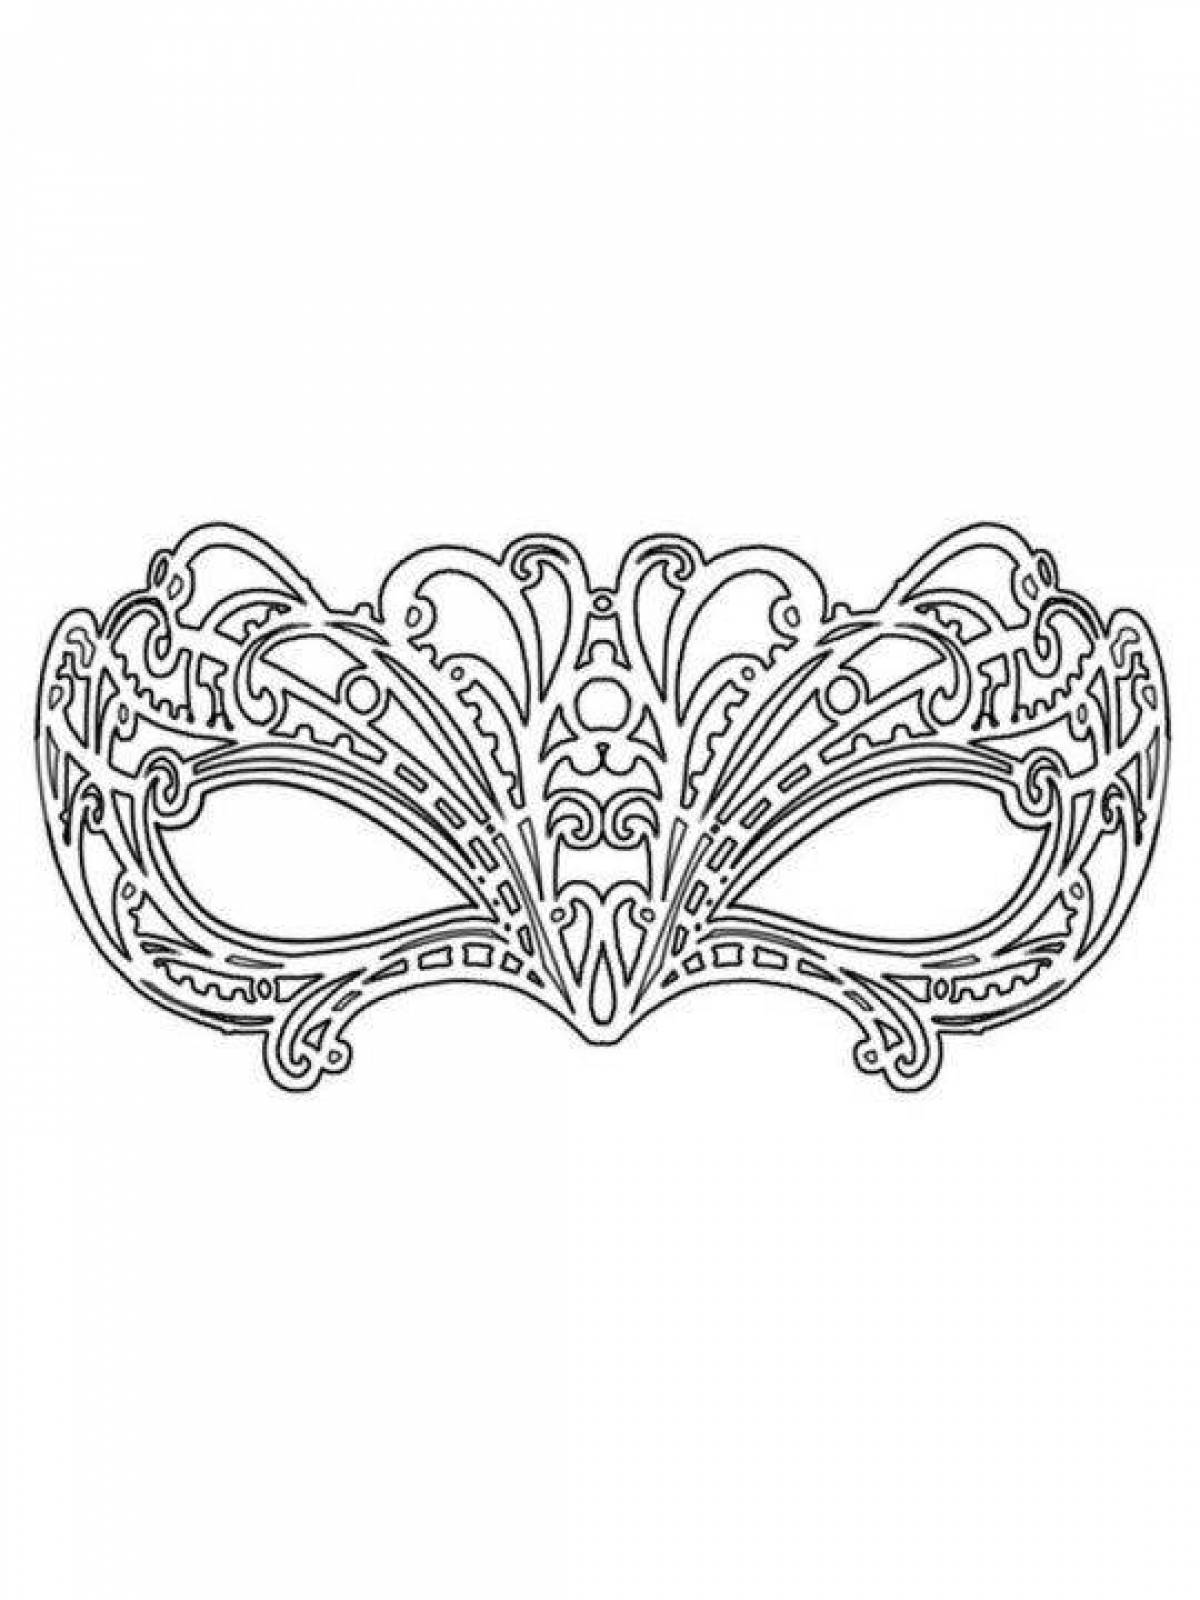 Majestic masquerade mask coloring page